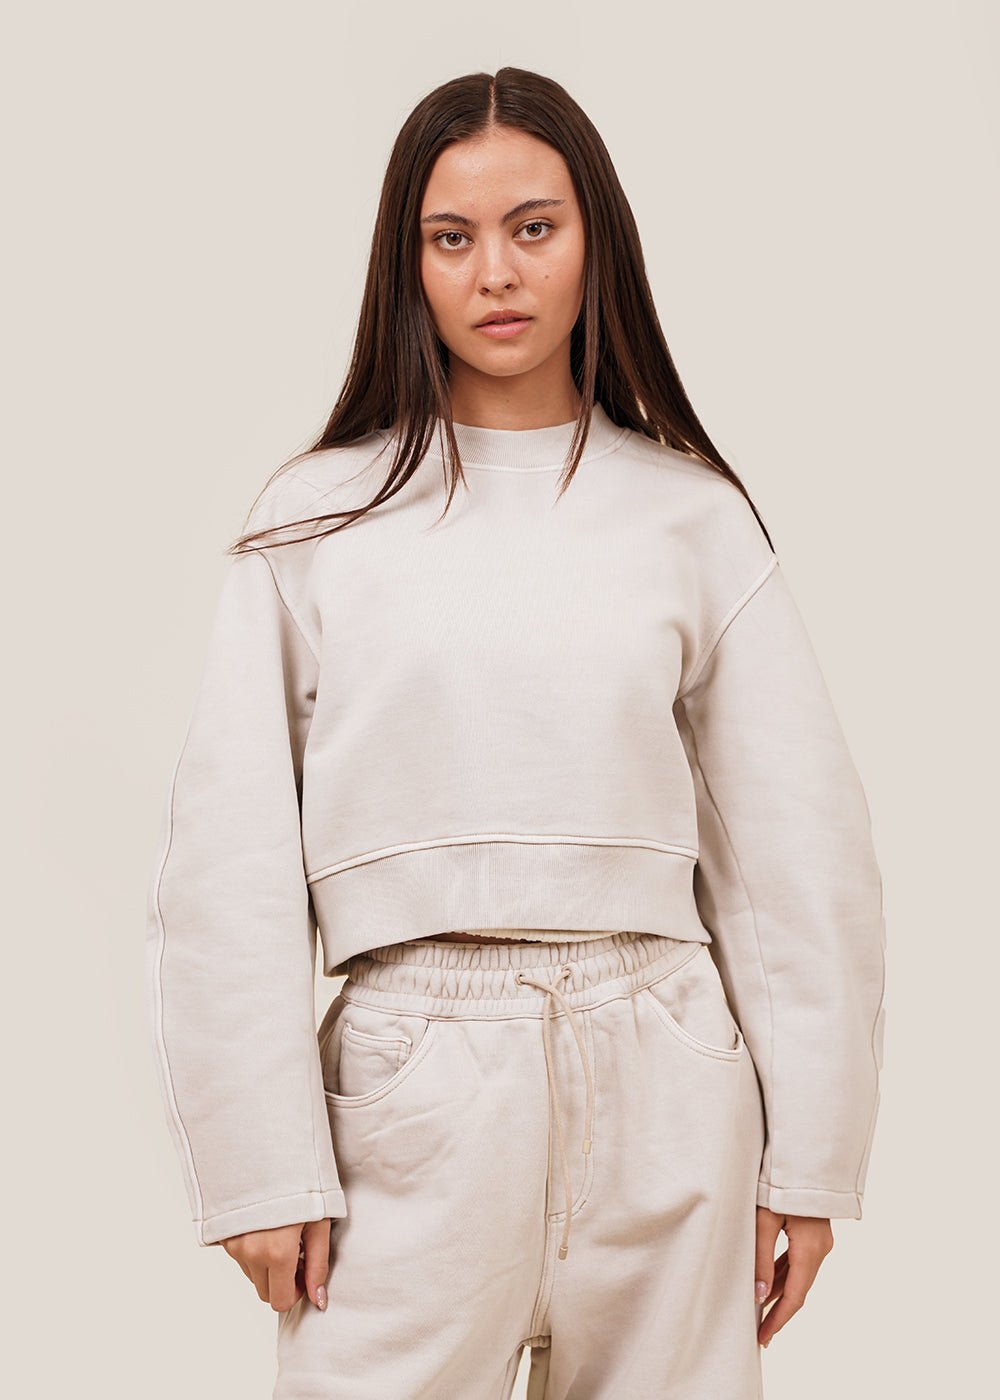 https://newclassics.ca/cdn/shop/products/amomento-beige-round-sleeve-cropped-sweatshirt-new-classics-studios-sustainable-and-ethical-fashion-canada-634416_1000x.jpg?v=1687281636